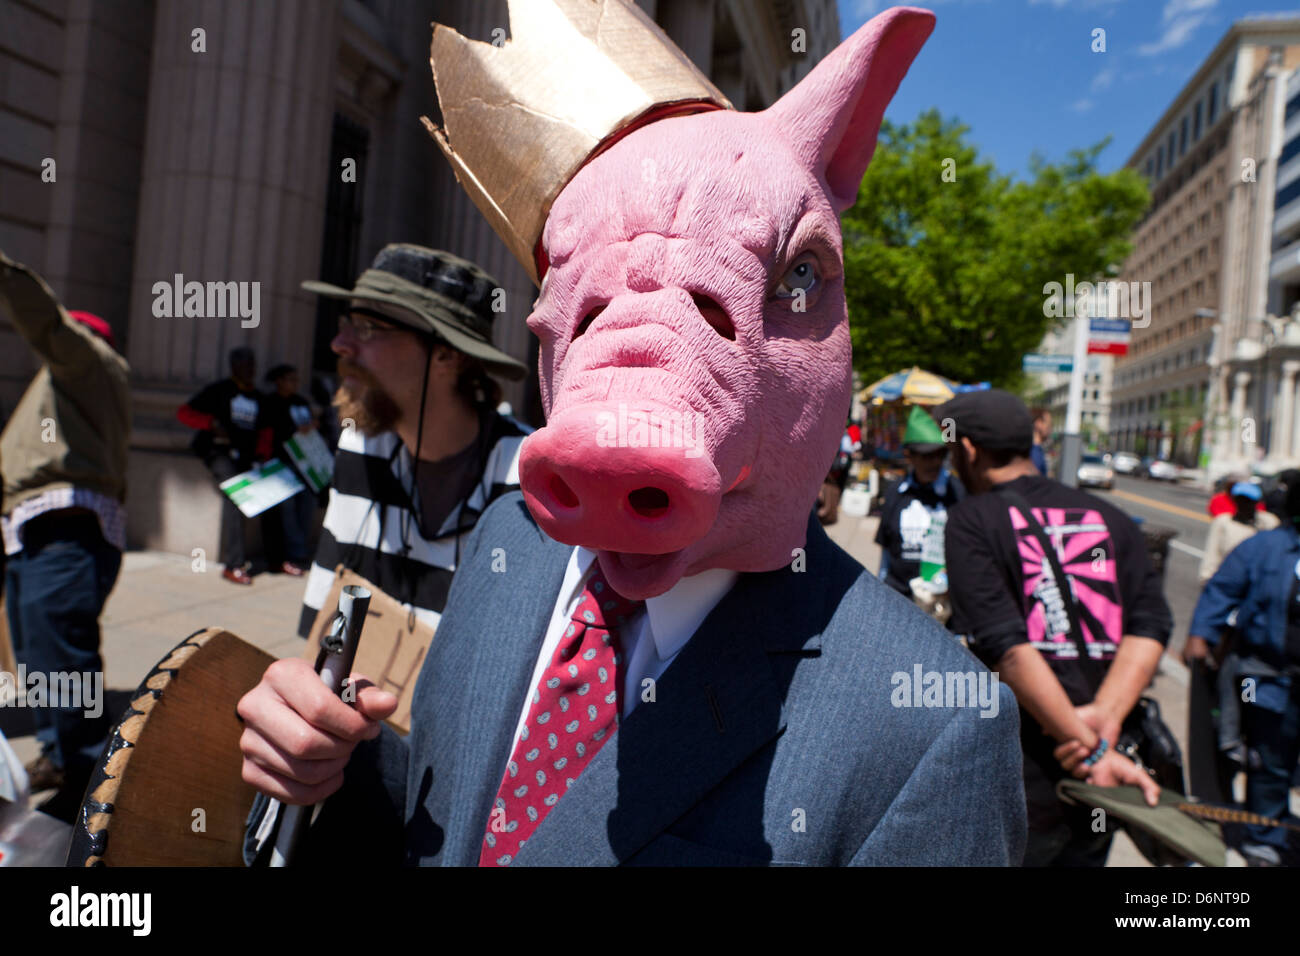 Man wearing a pig mask in rally Stock Photo